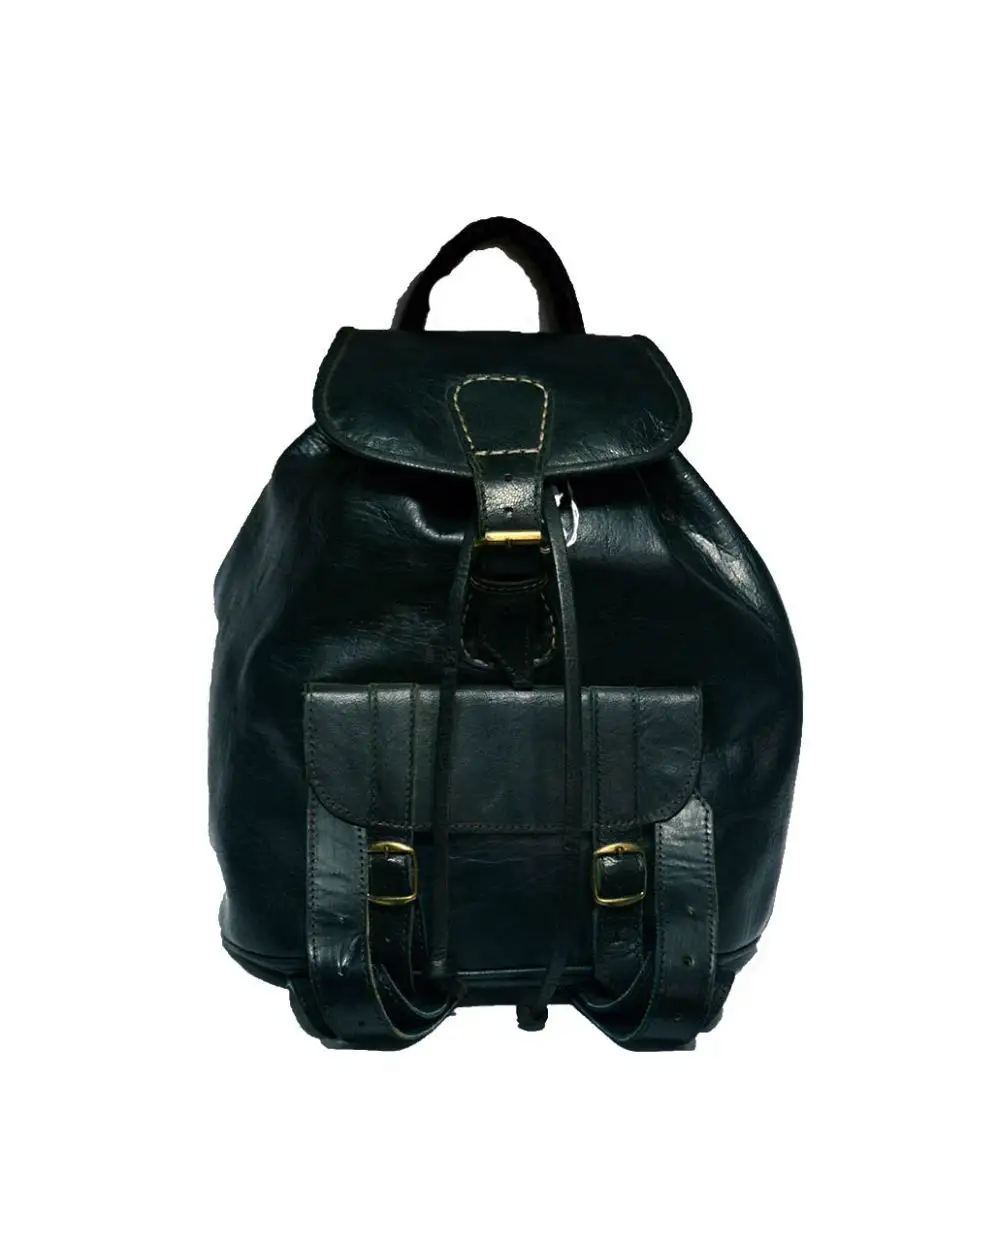 Moroccan genuine leather luxury backpack, Unique backpack with matching sides Moroccan handmade leather backpack by our artisans